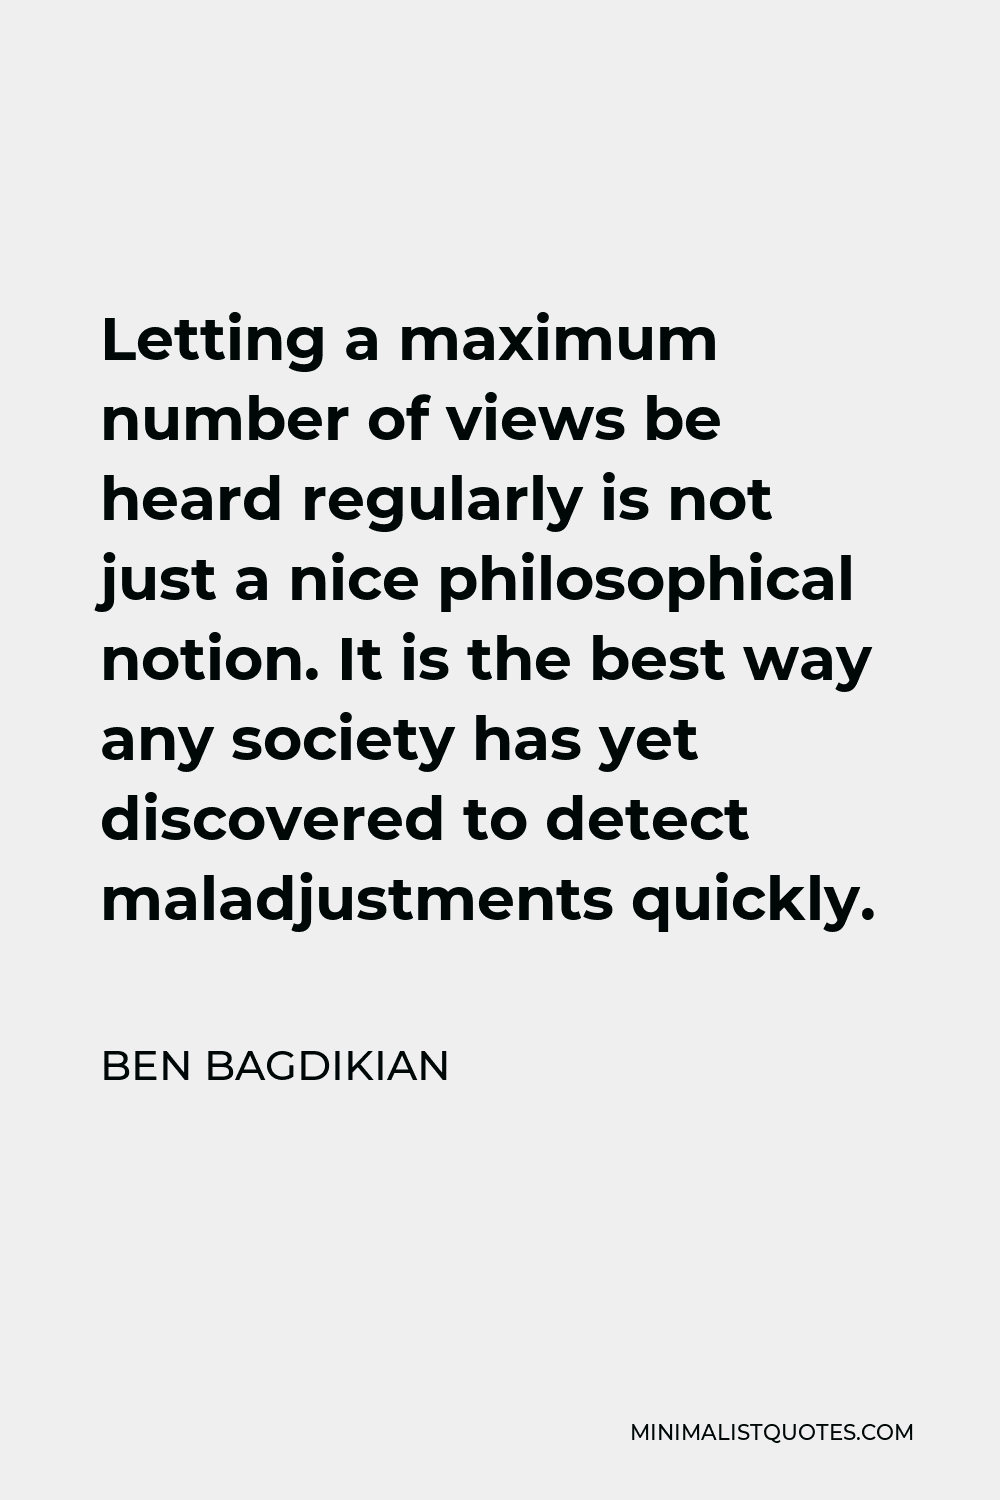 Ben Bagdikian Quote - Letting a maximum number of views be heard regularly is not just a nice philosophical notion. It is the best way any society has yet discovered to detect maladjustments quickly.